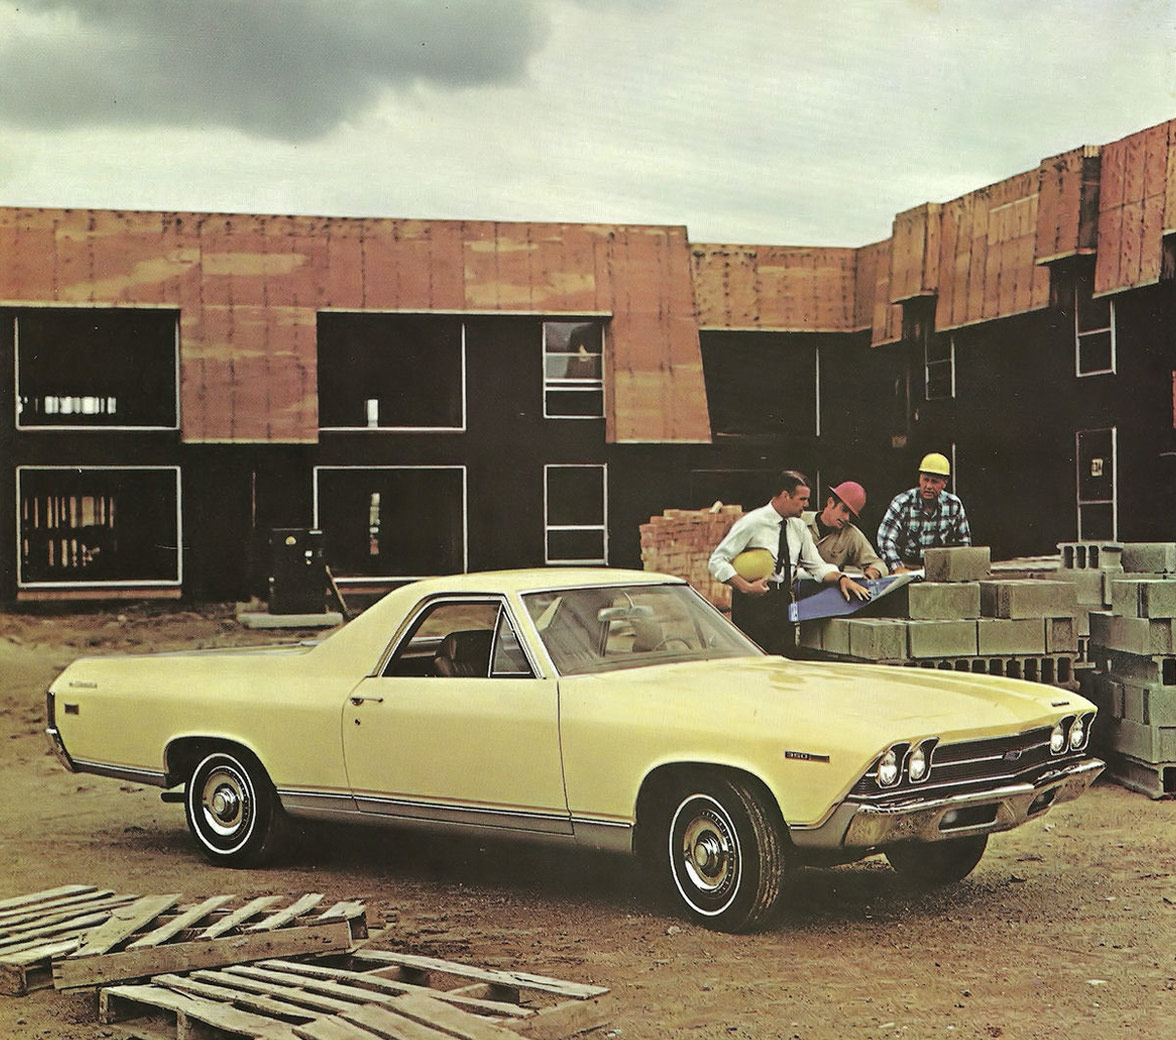 Vintage Chevy El Camino with construction workers in the background